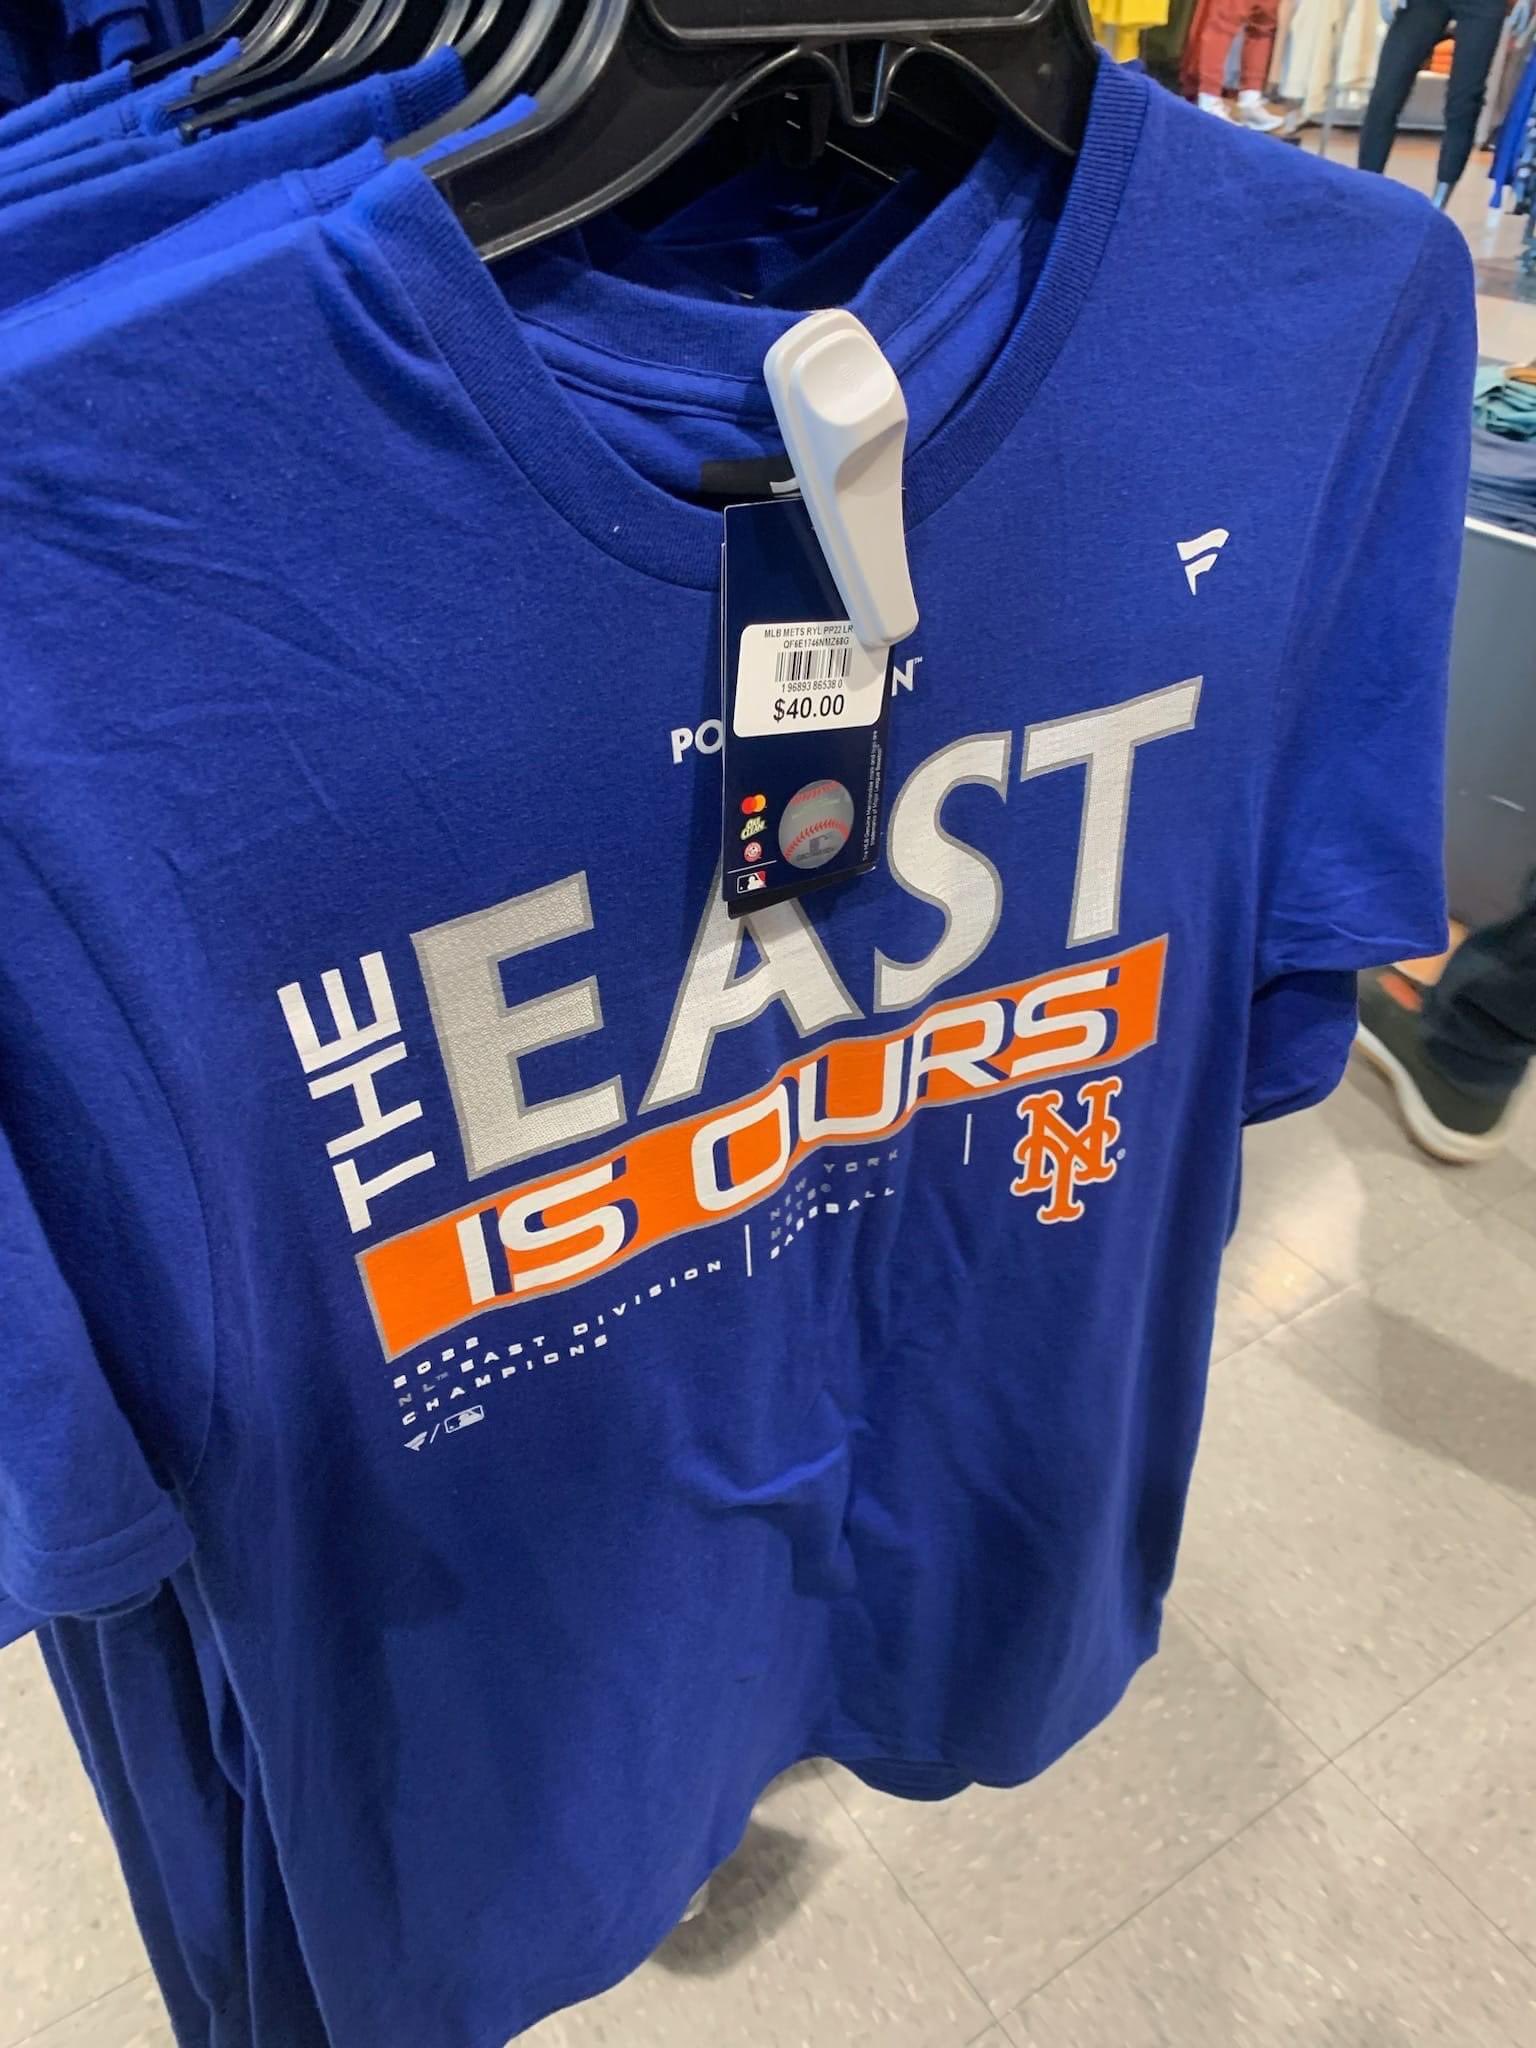 Paul C on X: Selling at Dicks sporting goods. It hit the shelves right  before they got Swept by the Braves. 'The East is Ours' #Mets   / X